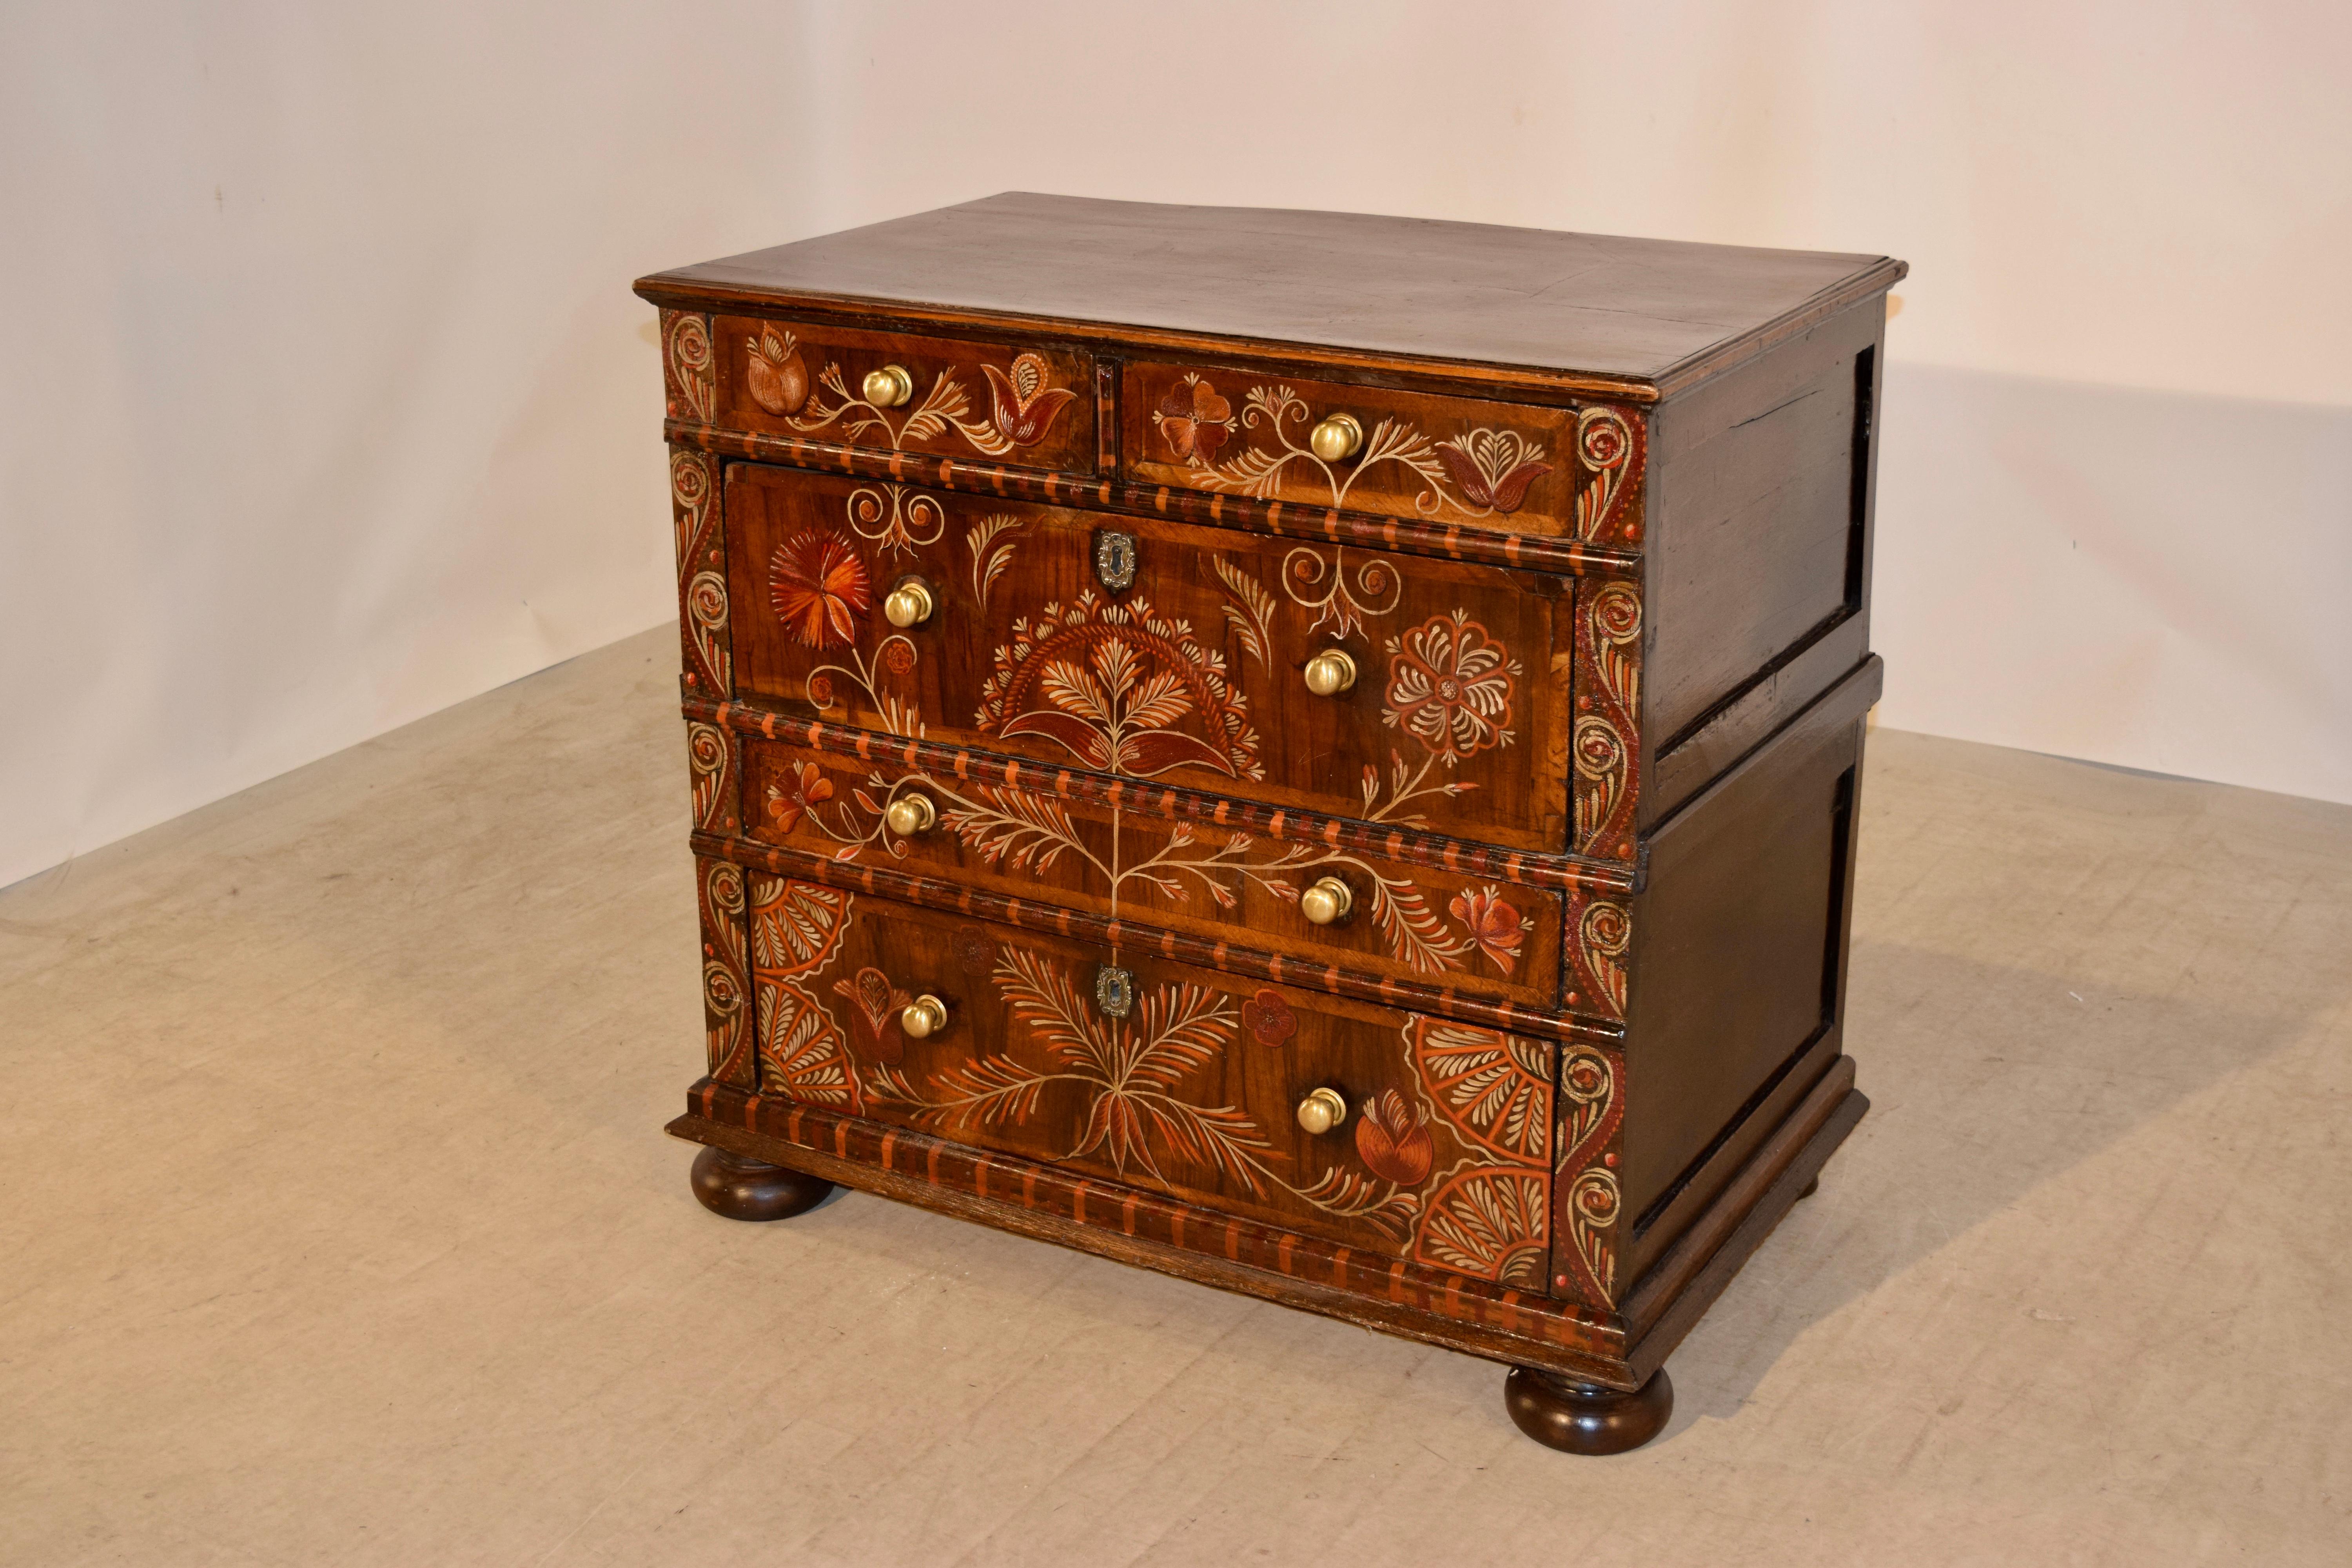 Hand-Painted 18th Century English Painted Chest of Drawers